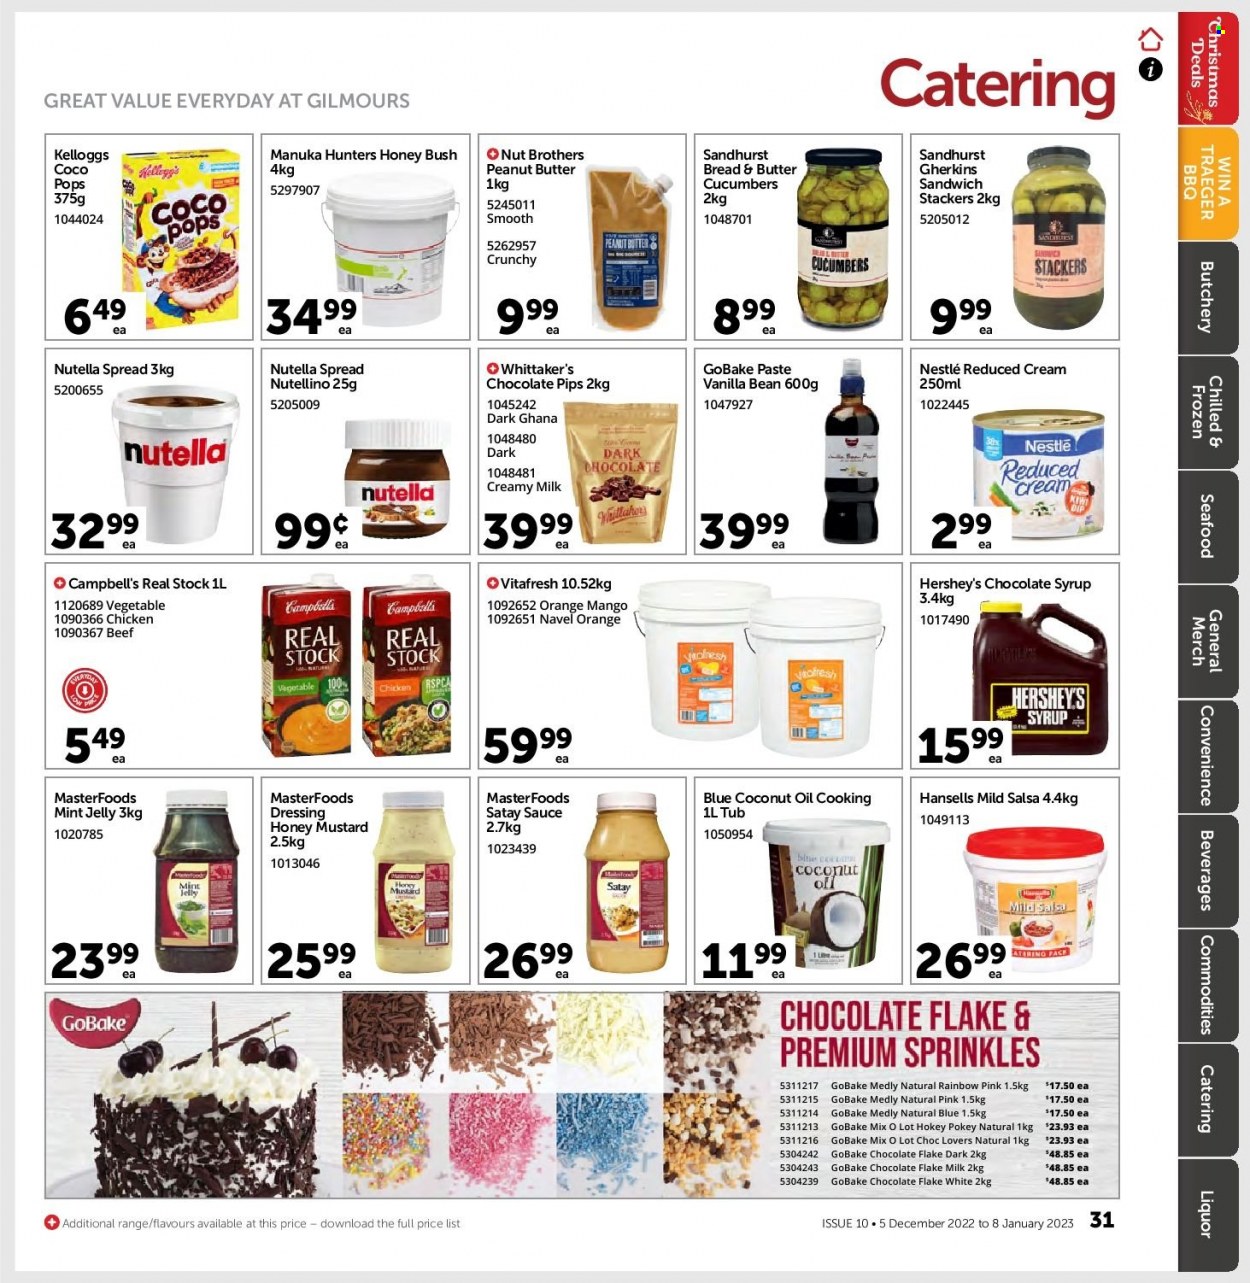 thumbnail - Gilmours mailer - 05.12.2022 - 08.01.2023 - Sales products - cucumber, mango, oranges, navel oranges, seafood, Campbell's, sandwich, sauce, Hershey's, Nestlé, Nutella, jelly, dark chocolate, Whittaker's, coco pops, mint jelly, mustard, honey mustard, dressing, salsa, coconut oil, oil, peanut butter, chocolate syrup, syrup, liquor, BROTHERS. Page 30.